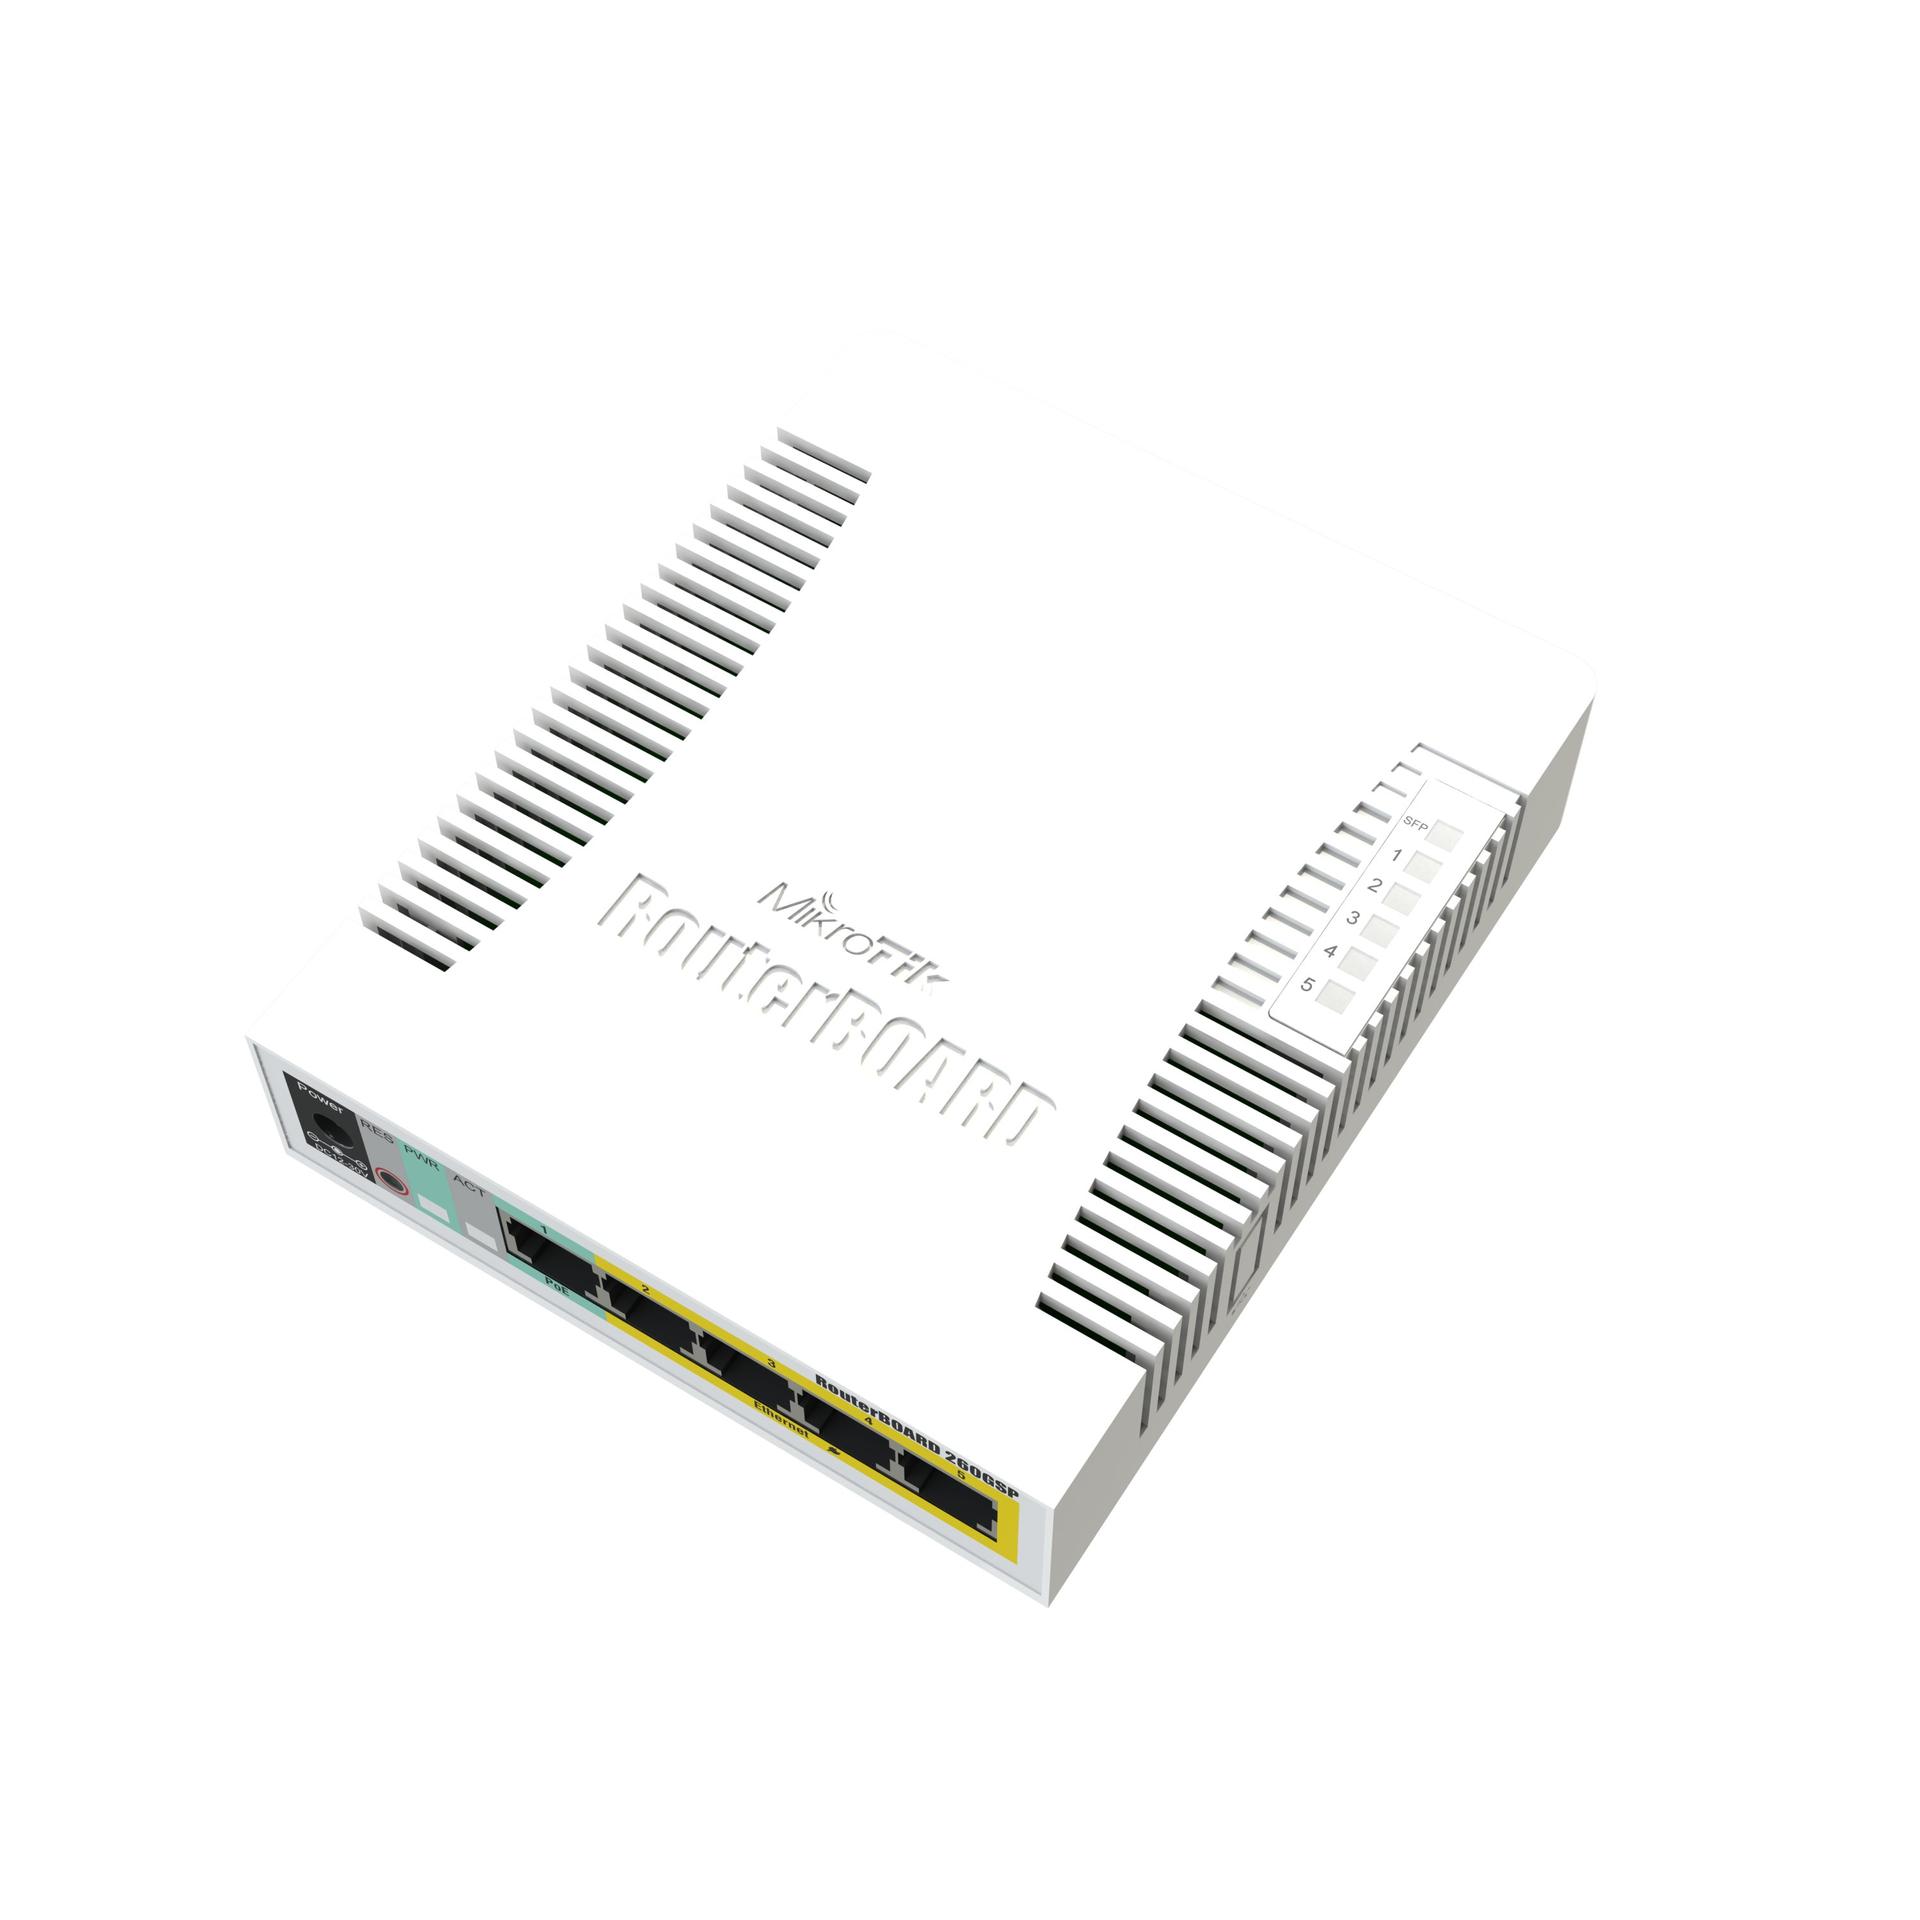 MikroTik RouterBOARD CSS106-1G-4P-1S 5-Port Switch (RB260GSP)